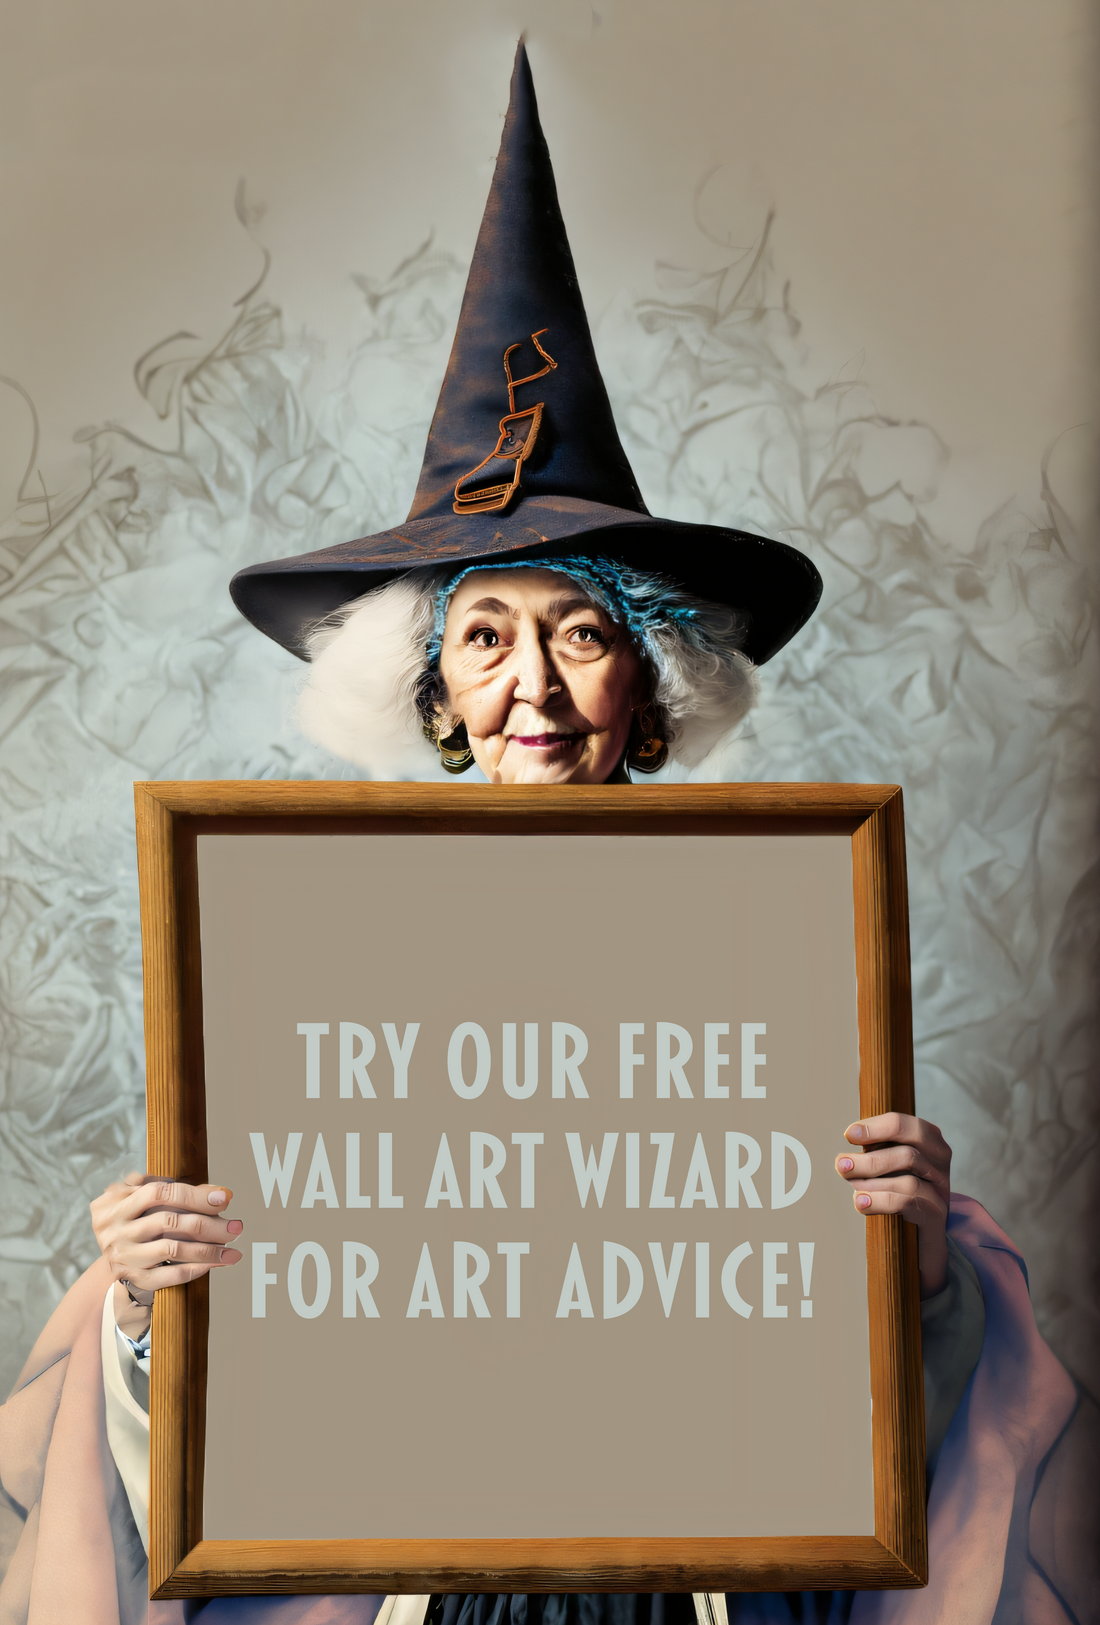 Presenting our new Wall Art Wizard!